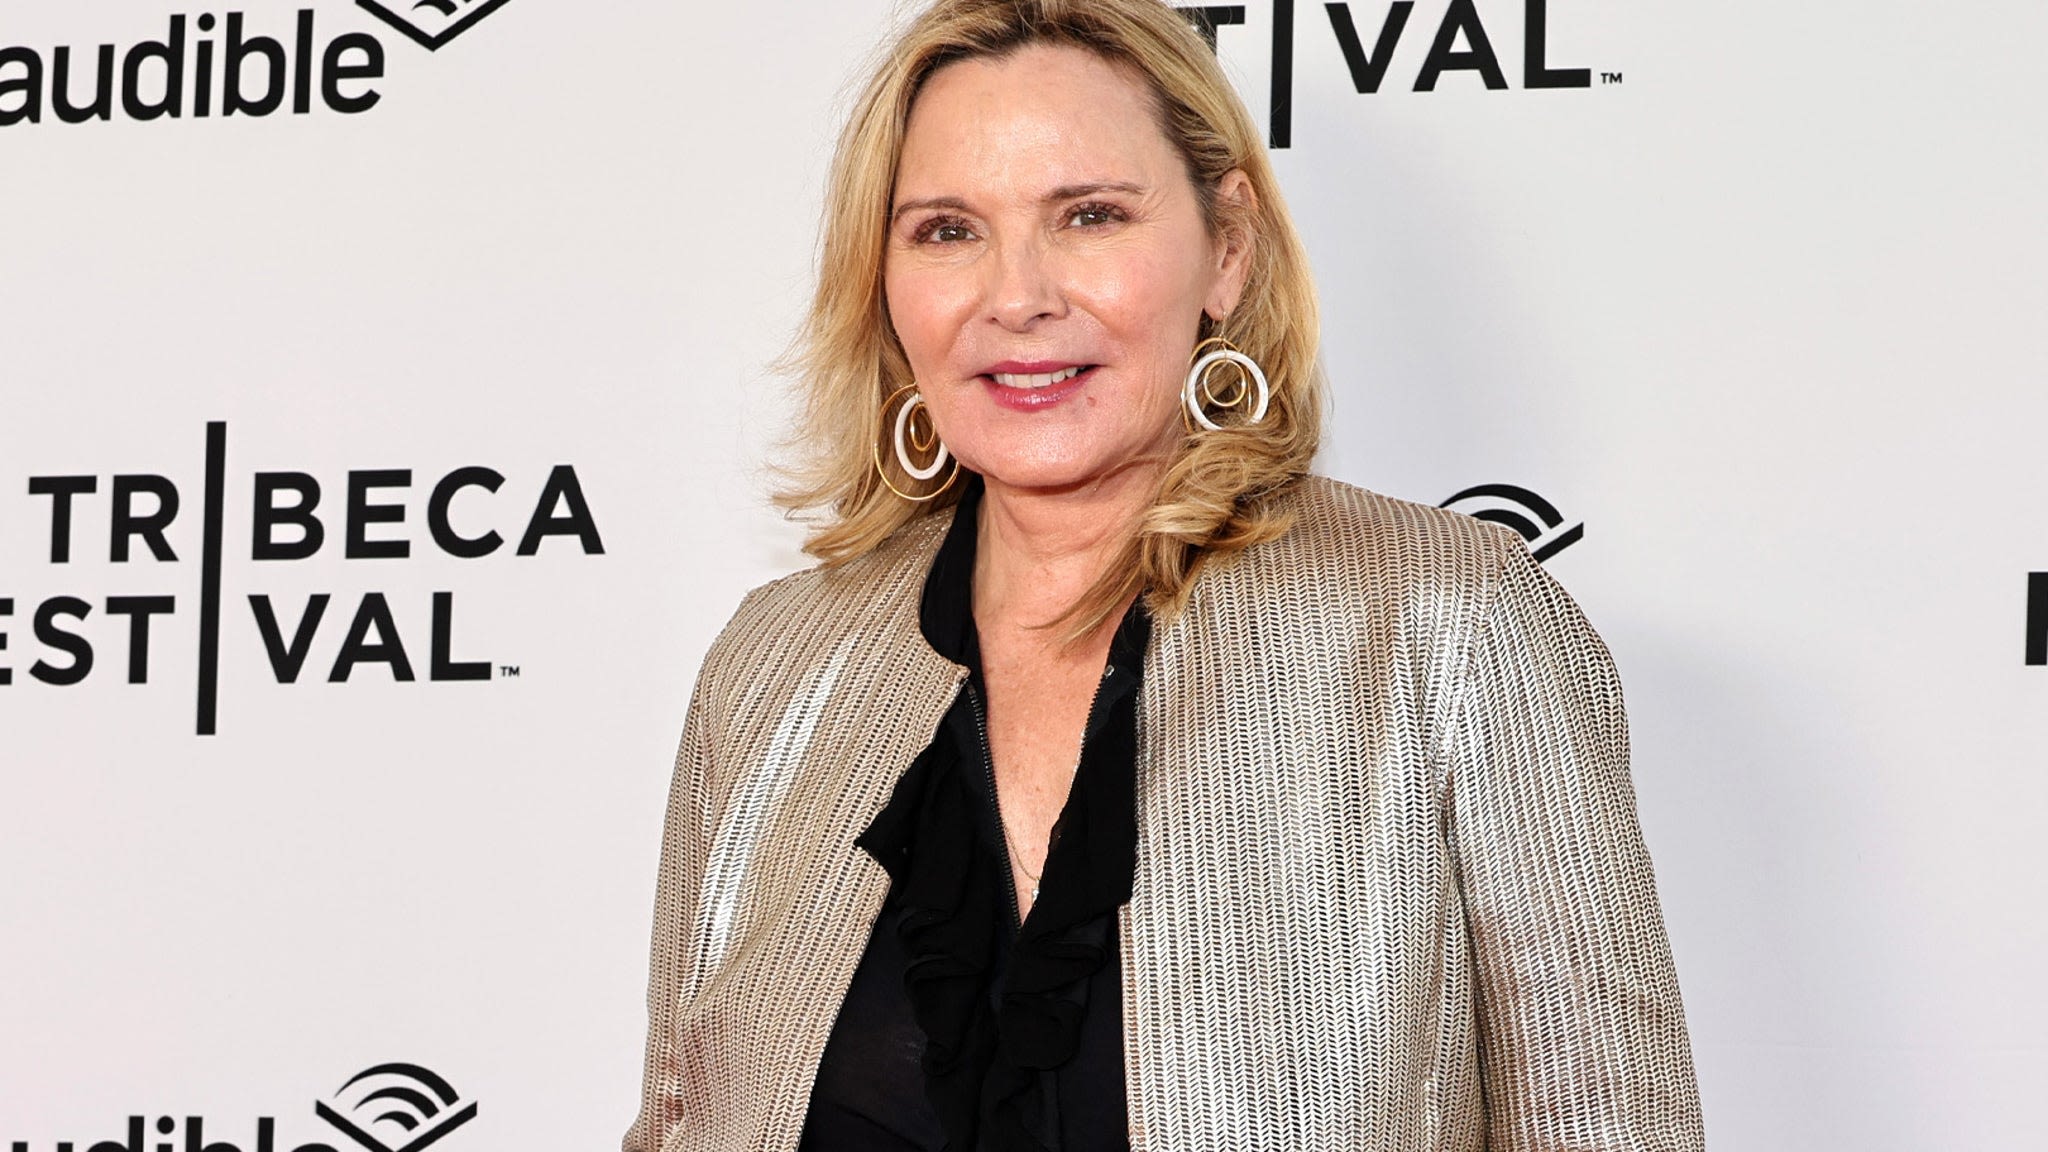 Kim Cattrall Responds to Rumors of Another And Just Like That Cameo for Season 3